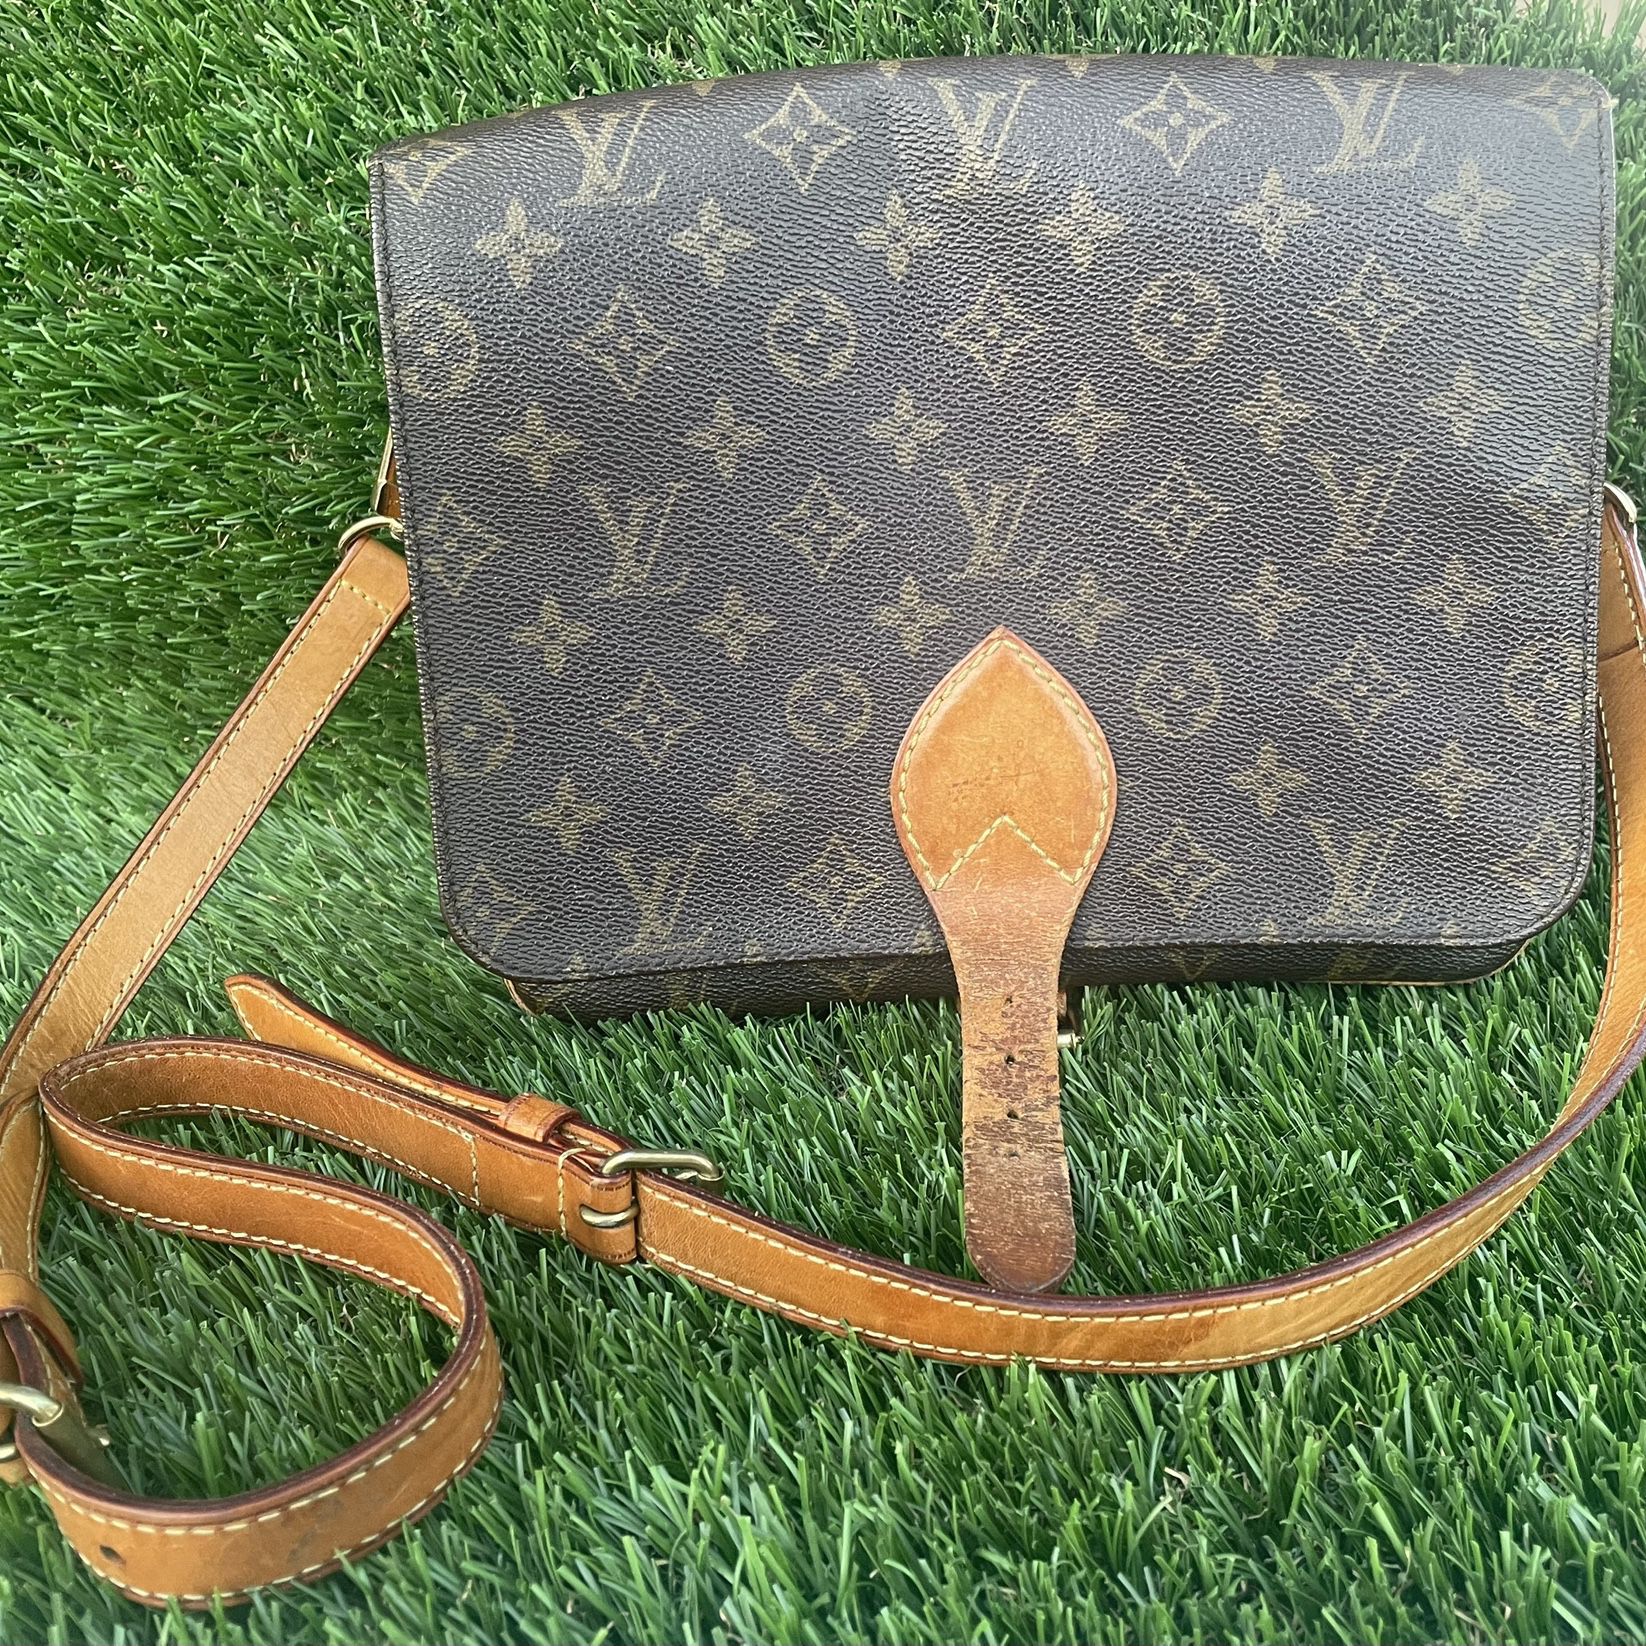 Red Crossbody LV Bag for Sale in Turlock, CA - OfferUp